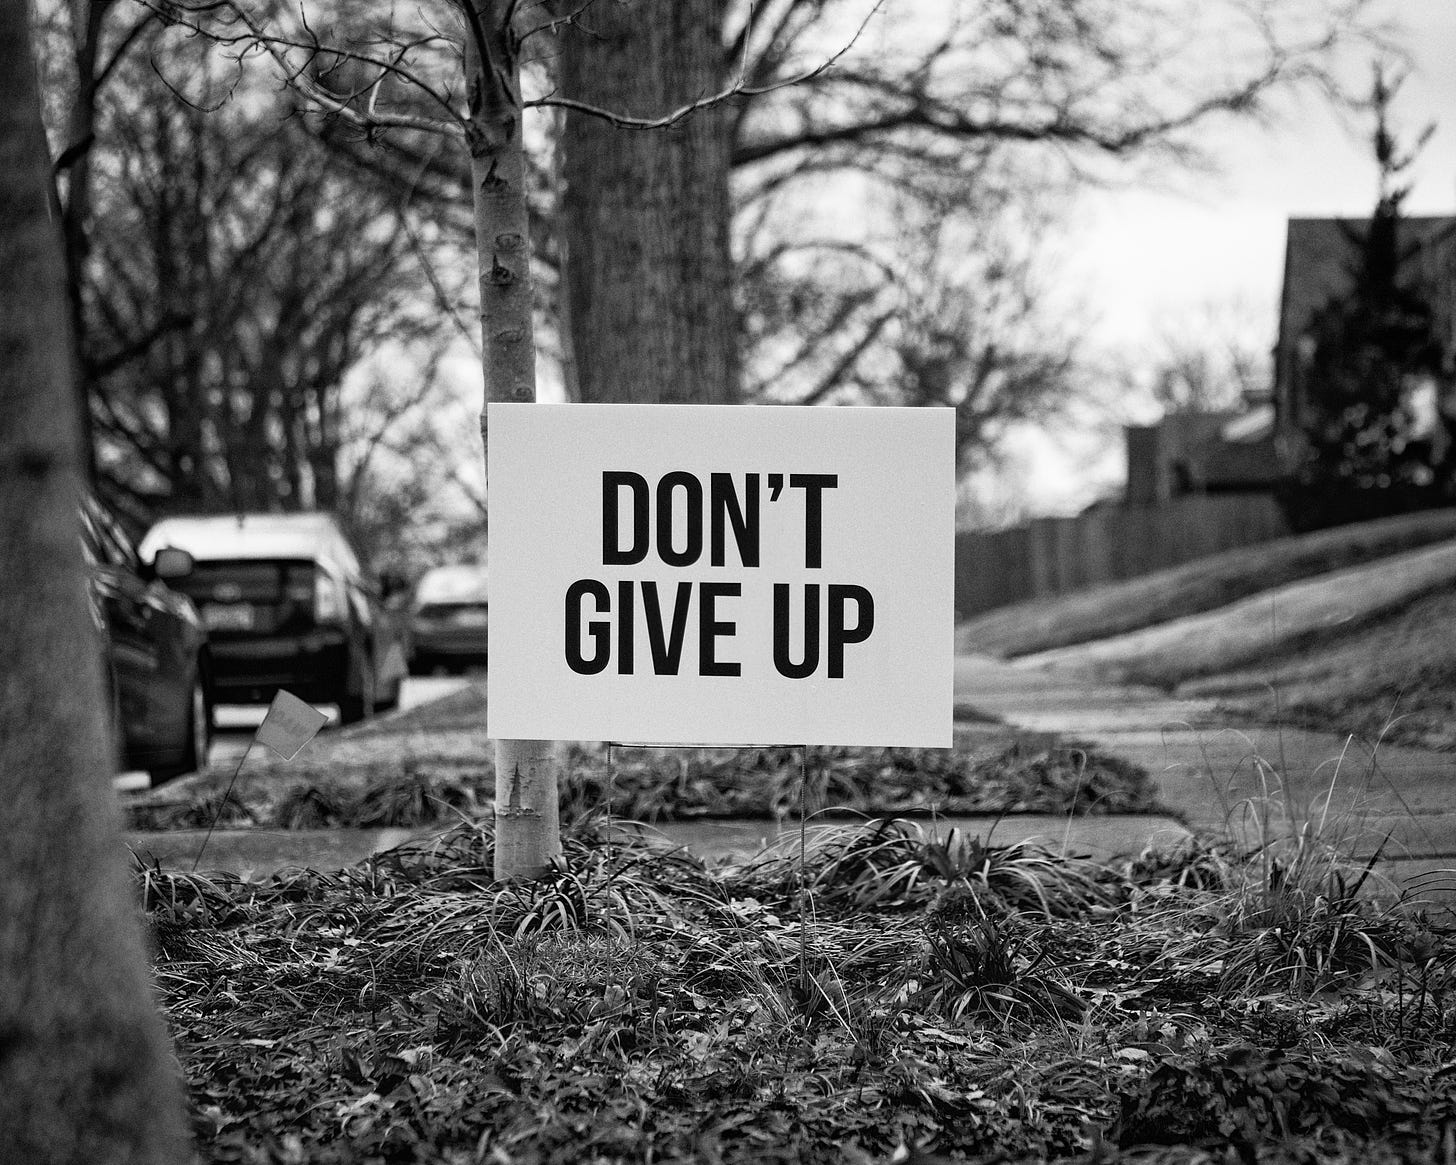 Don't give up.